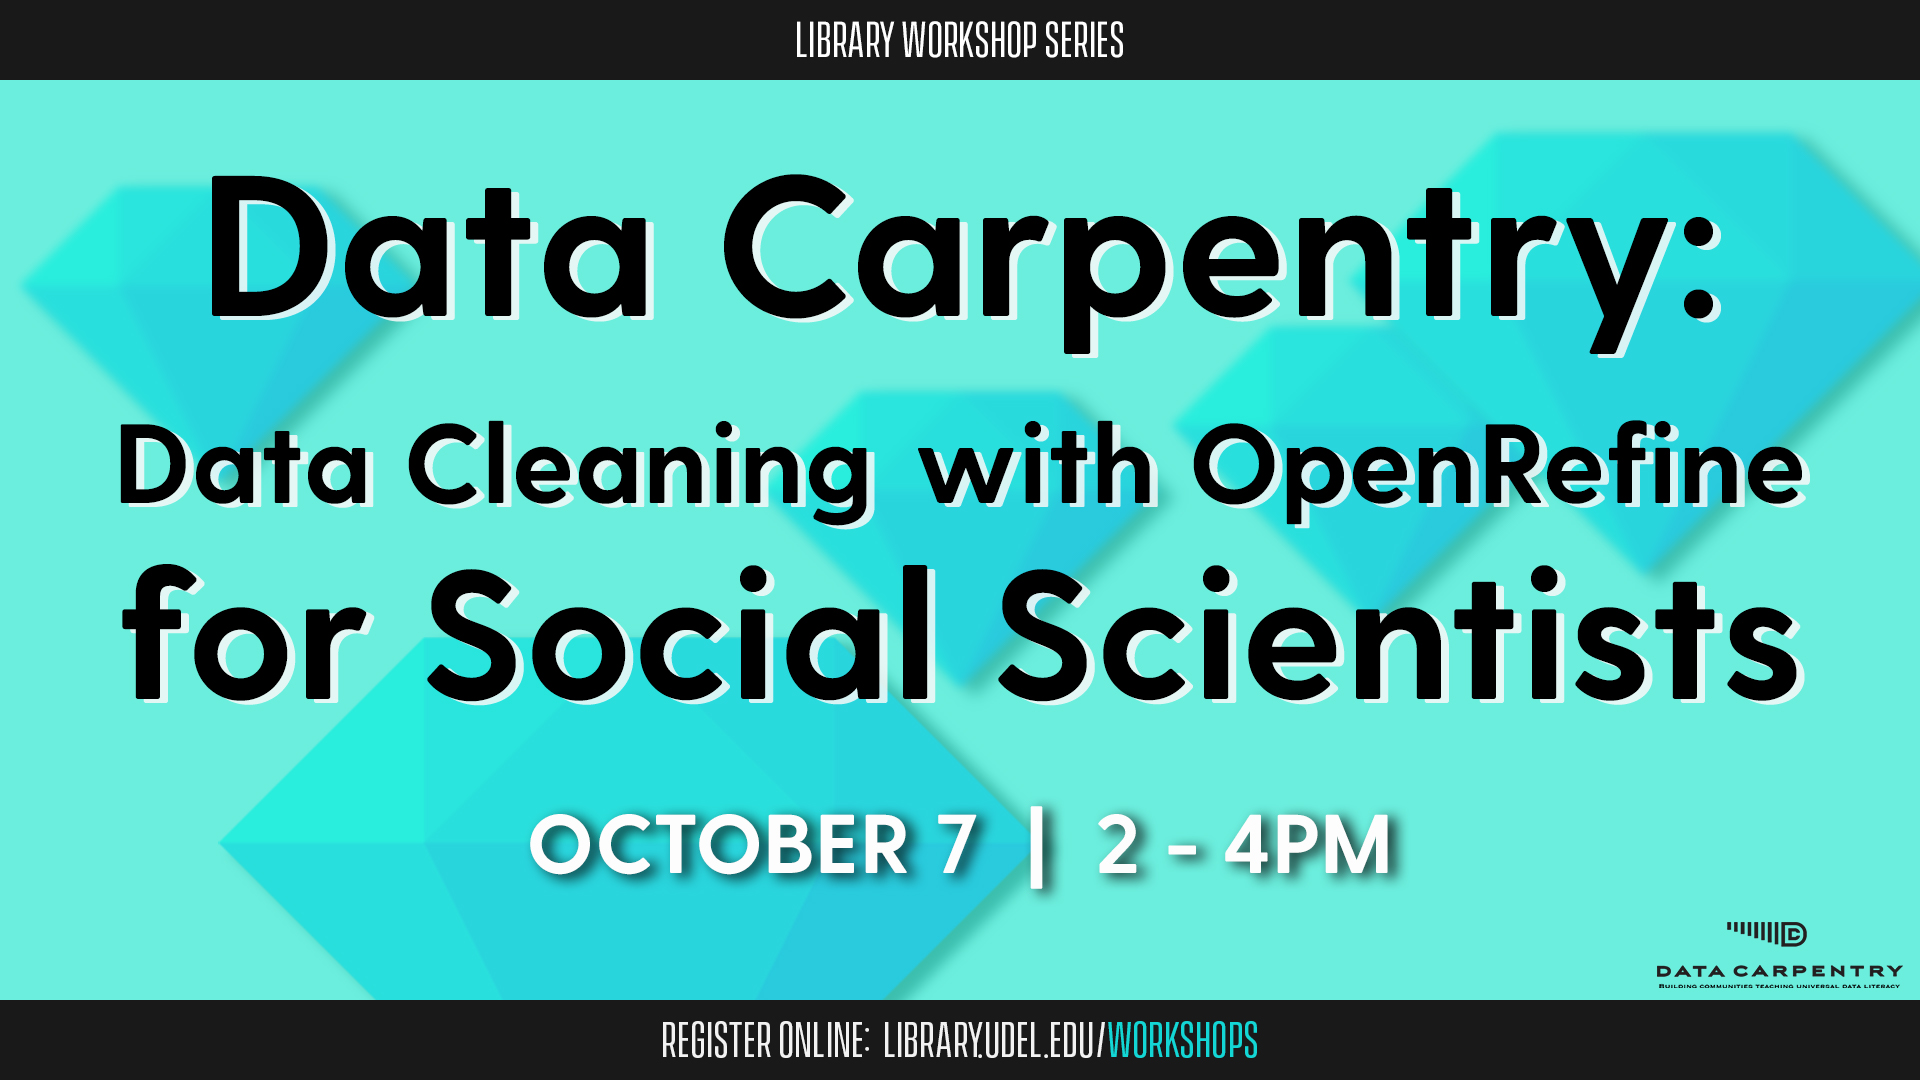 Data Carpentry: Data Cleaning with OpenRefine for Social Scientists